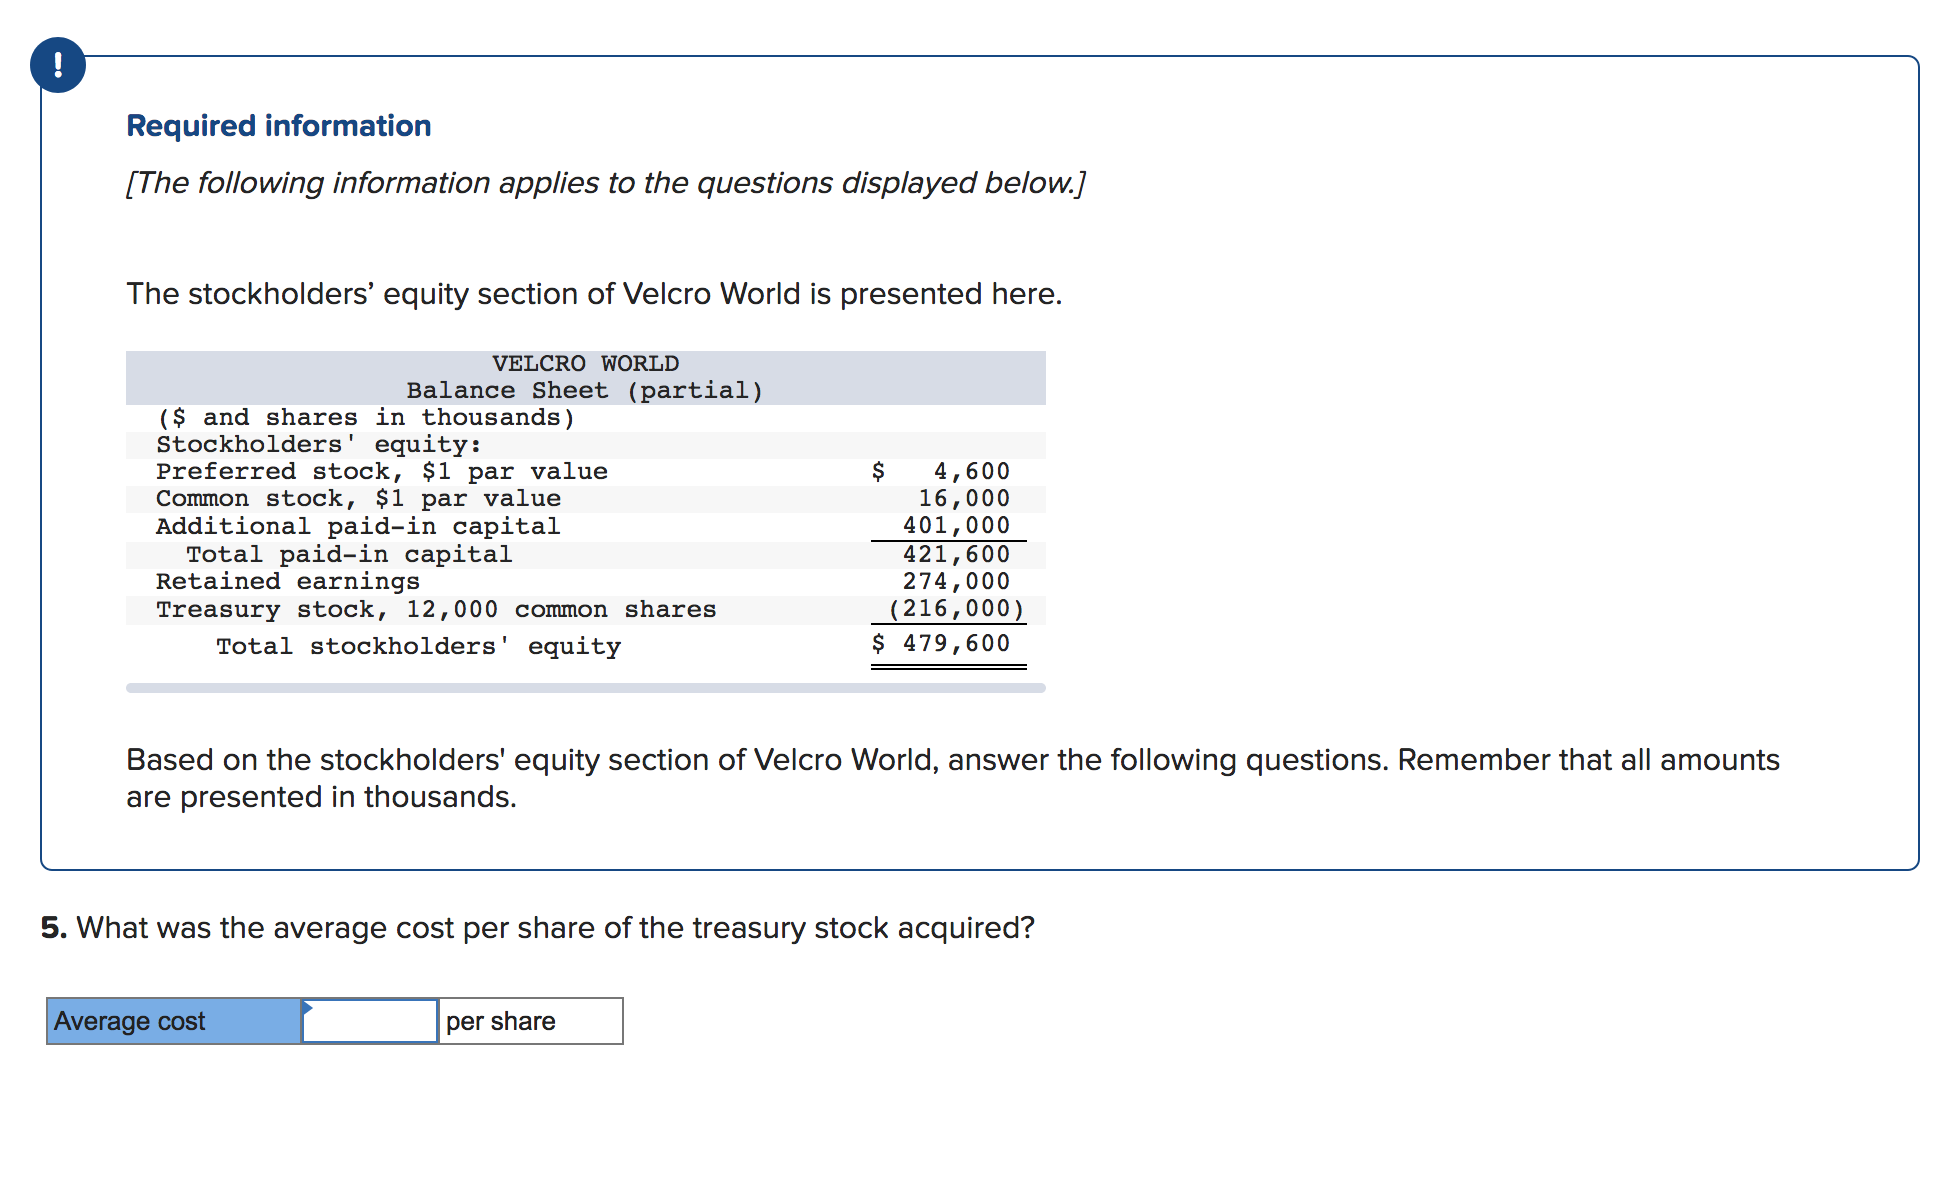 Required information
[The following information applies to the questions displayed below.]
The stockholders' equity section of Velcro World is presented here.
VELCRO WORLD
Balance Sheet (partial)
($ and shares in thousands)
Stockholders' equity:
Preferred stock, $1 par value
Common stock, $1 par value
Additional paid-in capital
Total paid-in capital
Retained earnings
Treasury stock, 12,000 common shares
Total stockholders' equity
$
4,600
16,000
401,000
421,600
274,000
(216,000)
$ 479,600
Based on the stockholders' equity section of Velcro World, answer the following questions. Remember that all amounts
are presented in thousands.
5. What was the average cost per share of the treasury stock acquired?
Average cost
per share
